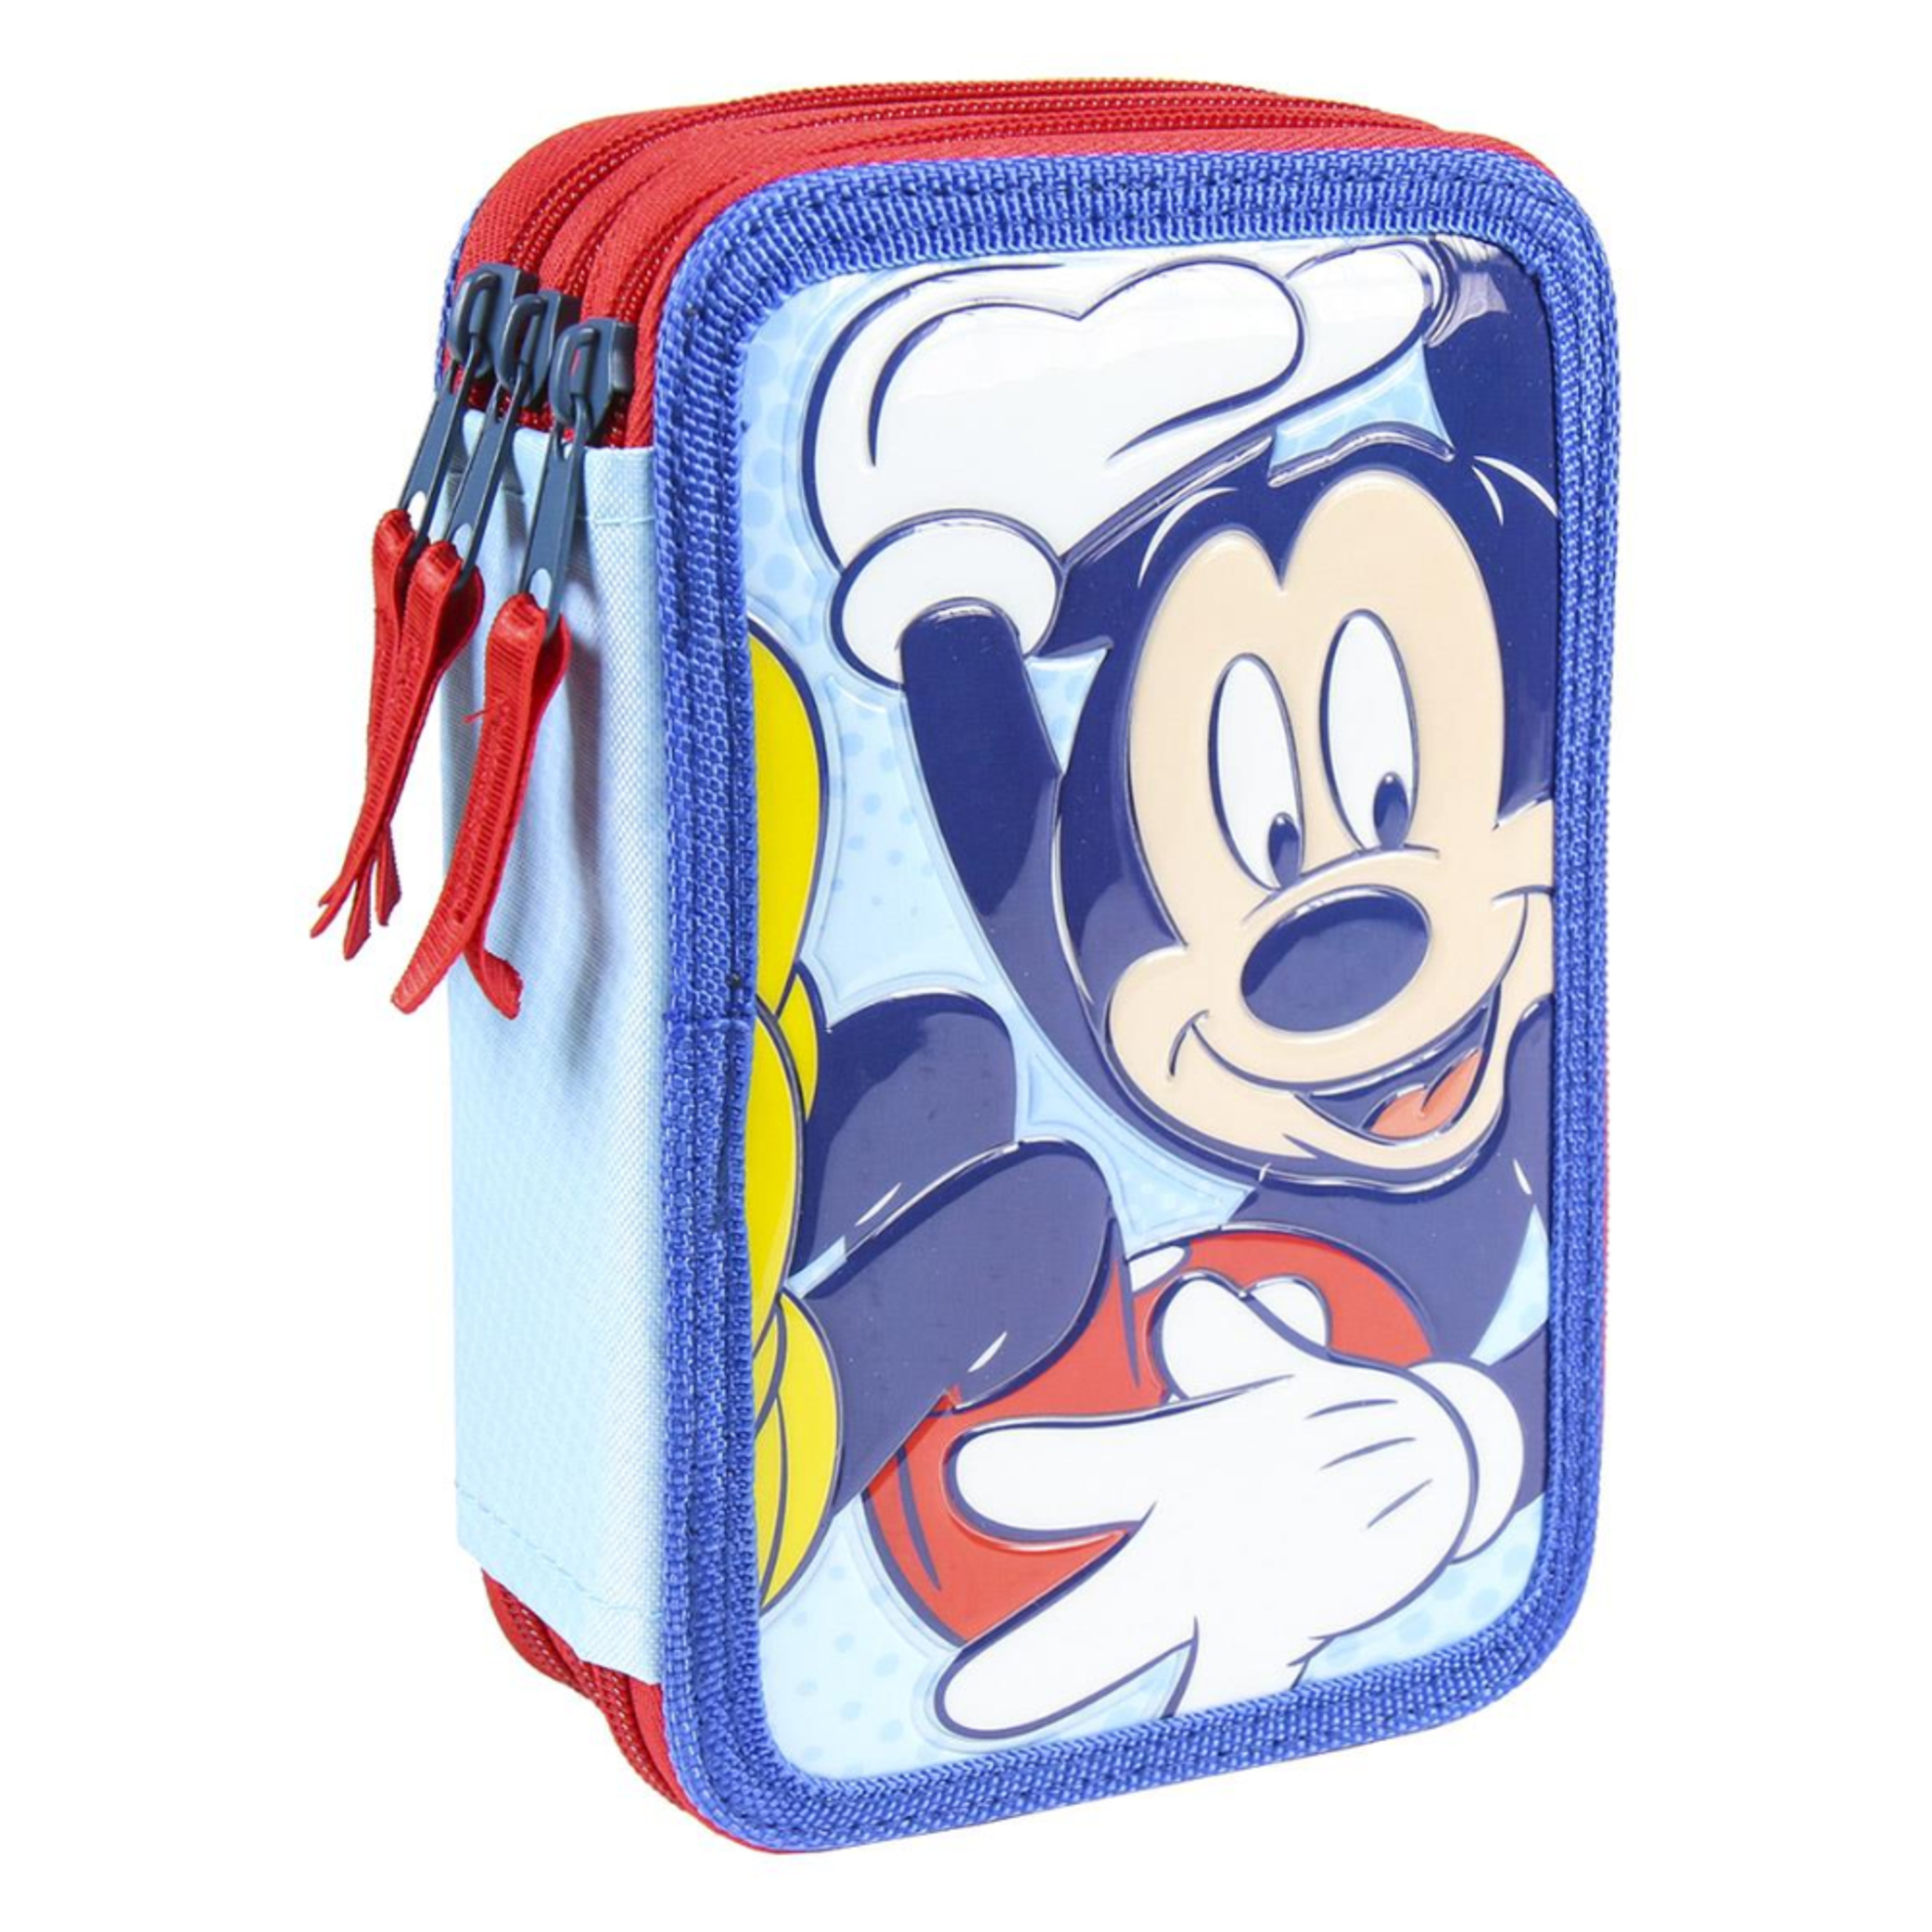 Plumier Mickey Mouse 64461 - rojo - 